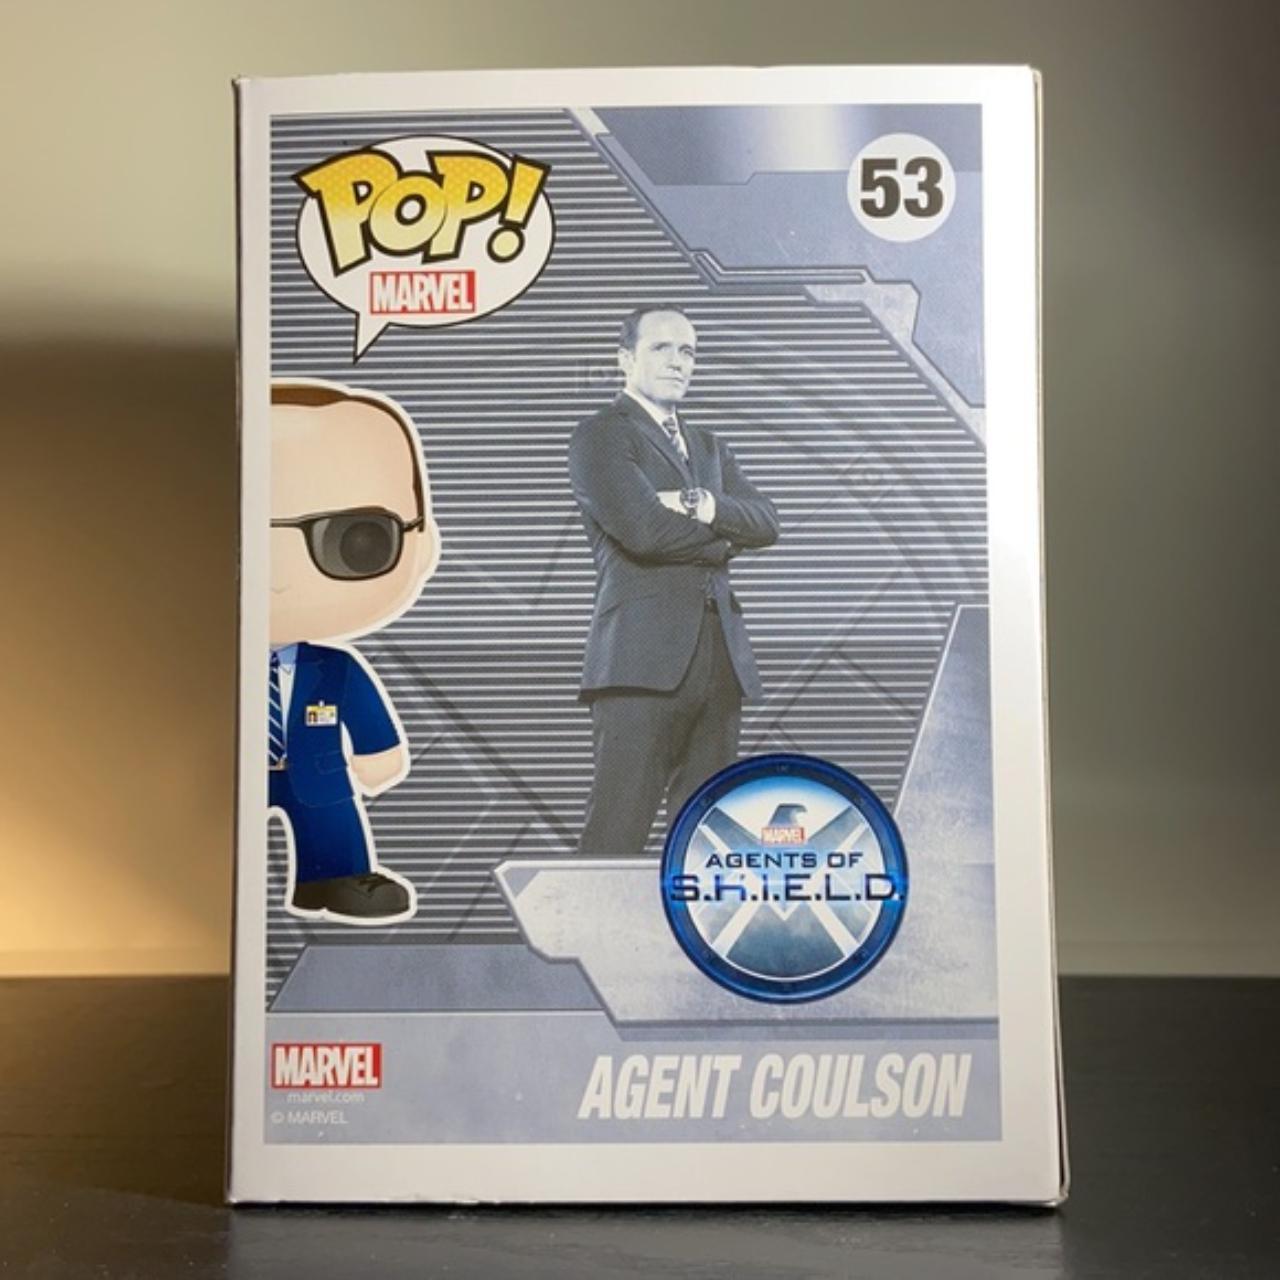 Product Image 2 - Agent Coulson
Type: Vinyl Art Toys
Brand: